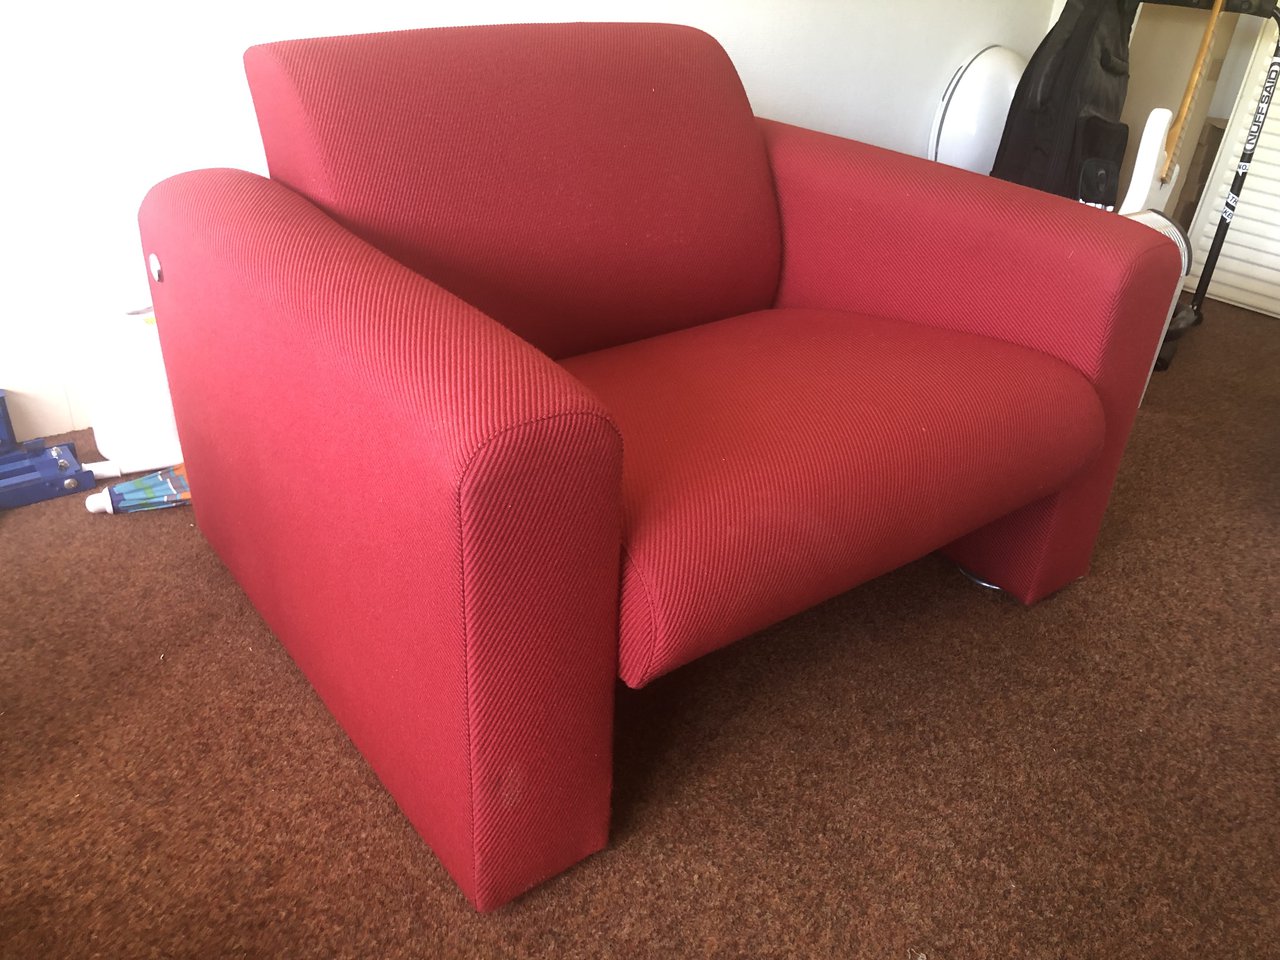 Artifort C691 two-seater sofa and armchair in very nice condition